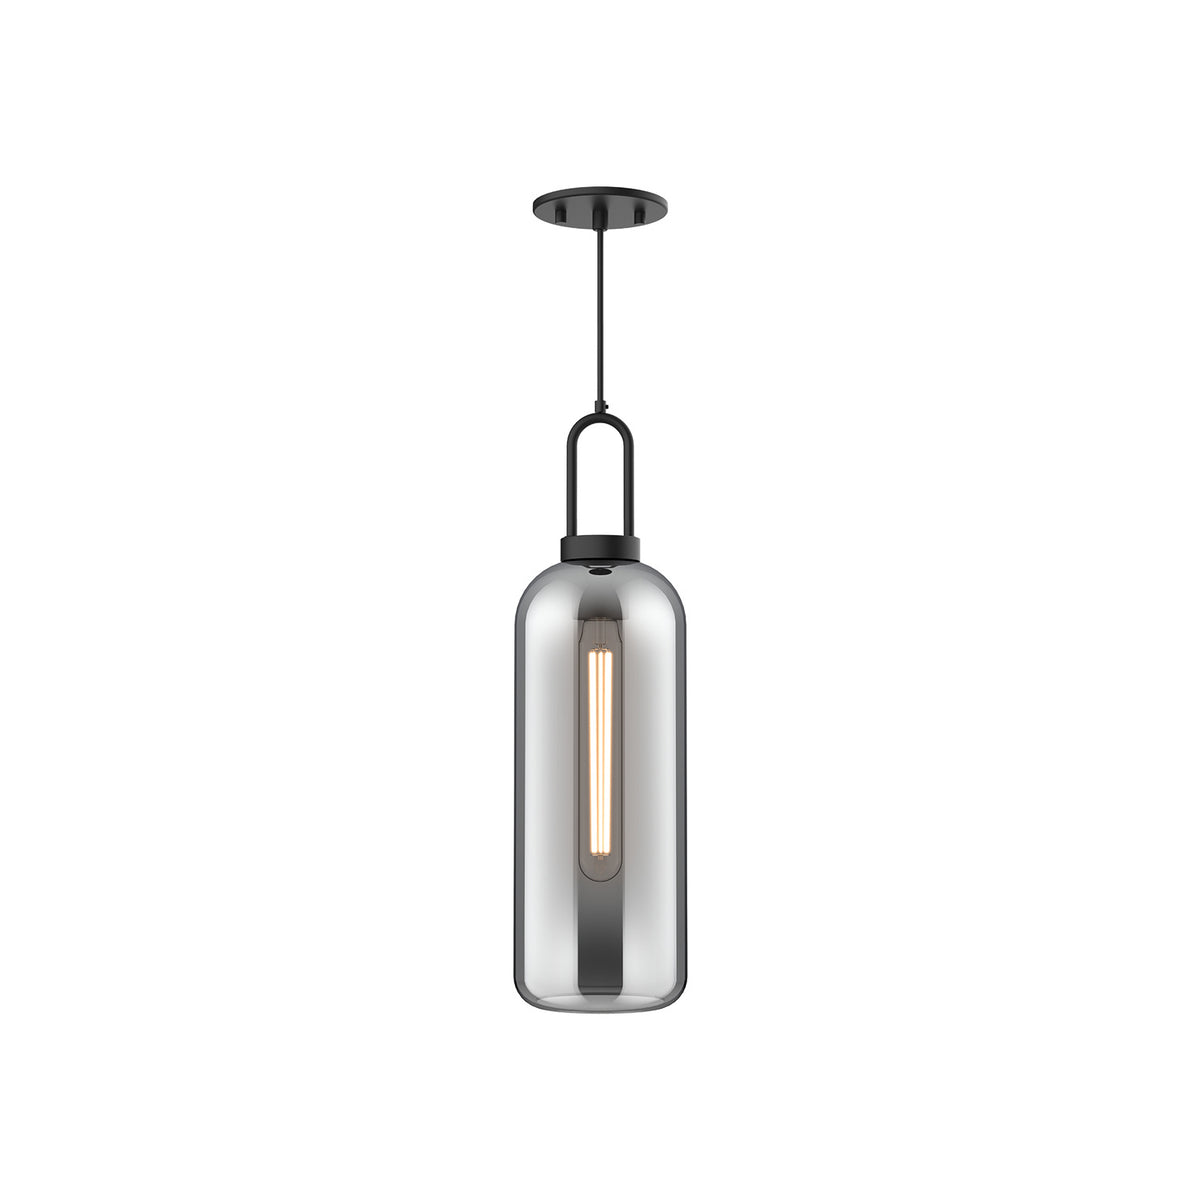 Alora One Light Pendant from the Soji collection in Matte Black finish